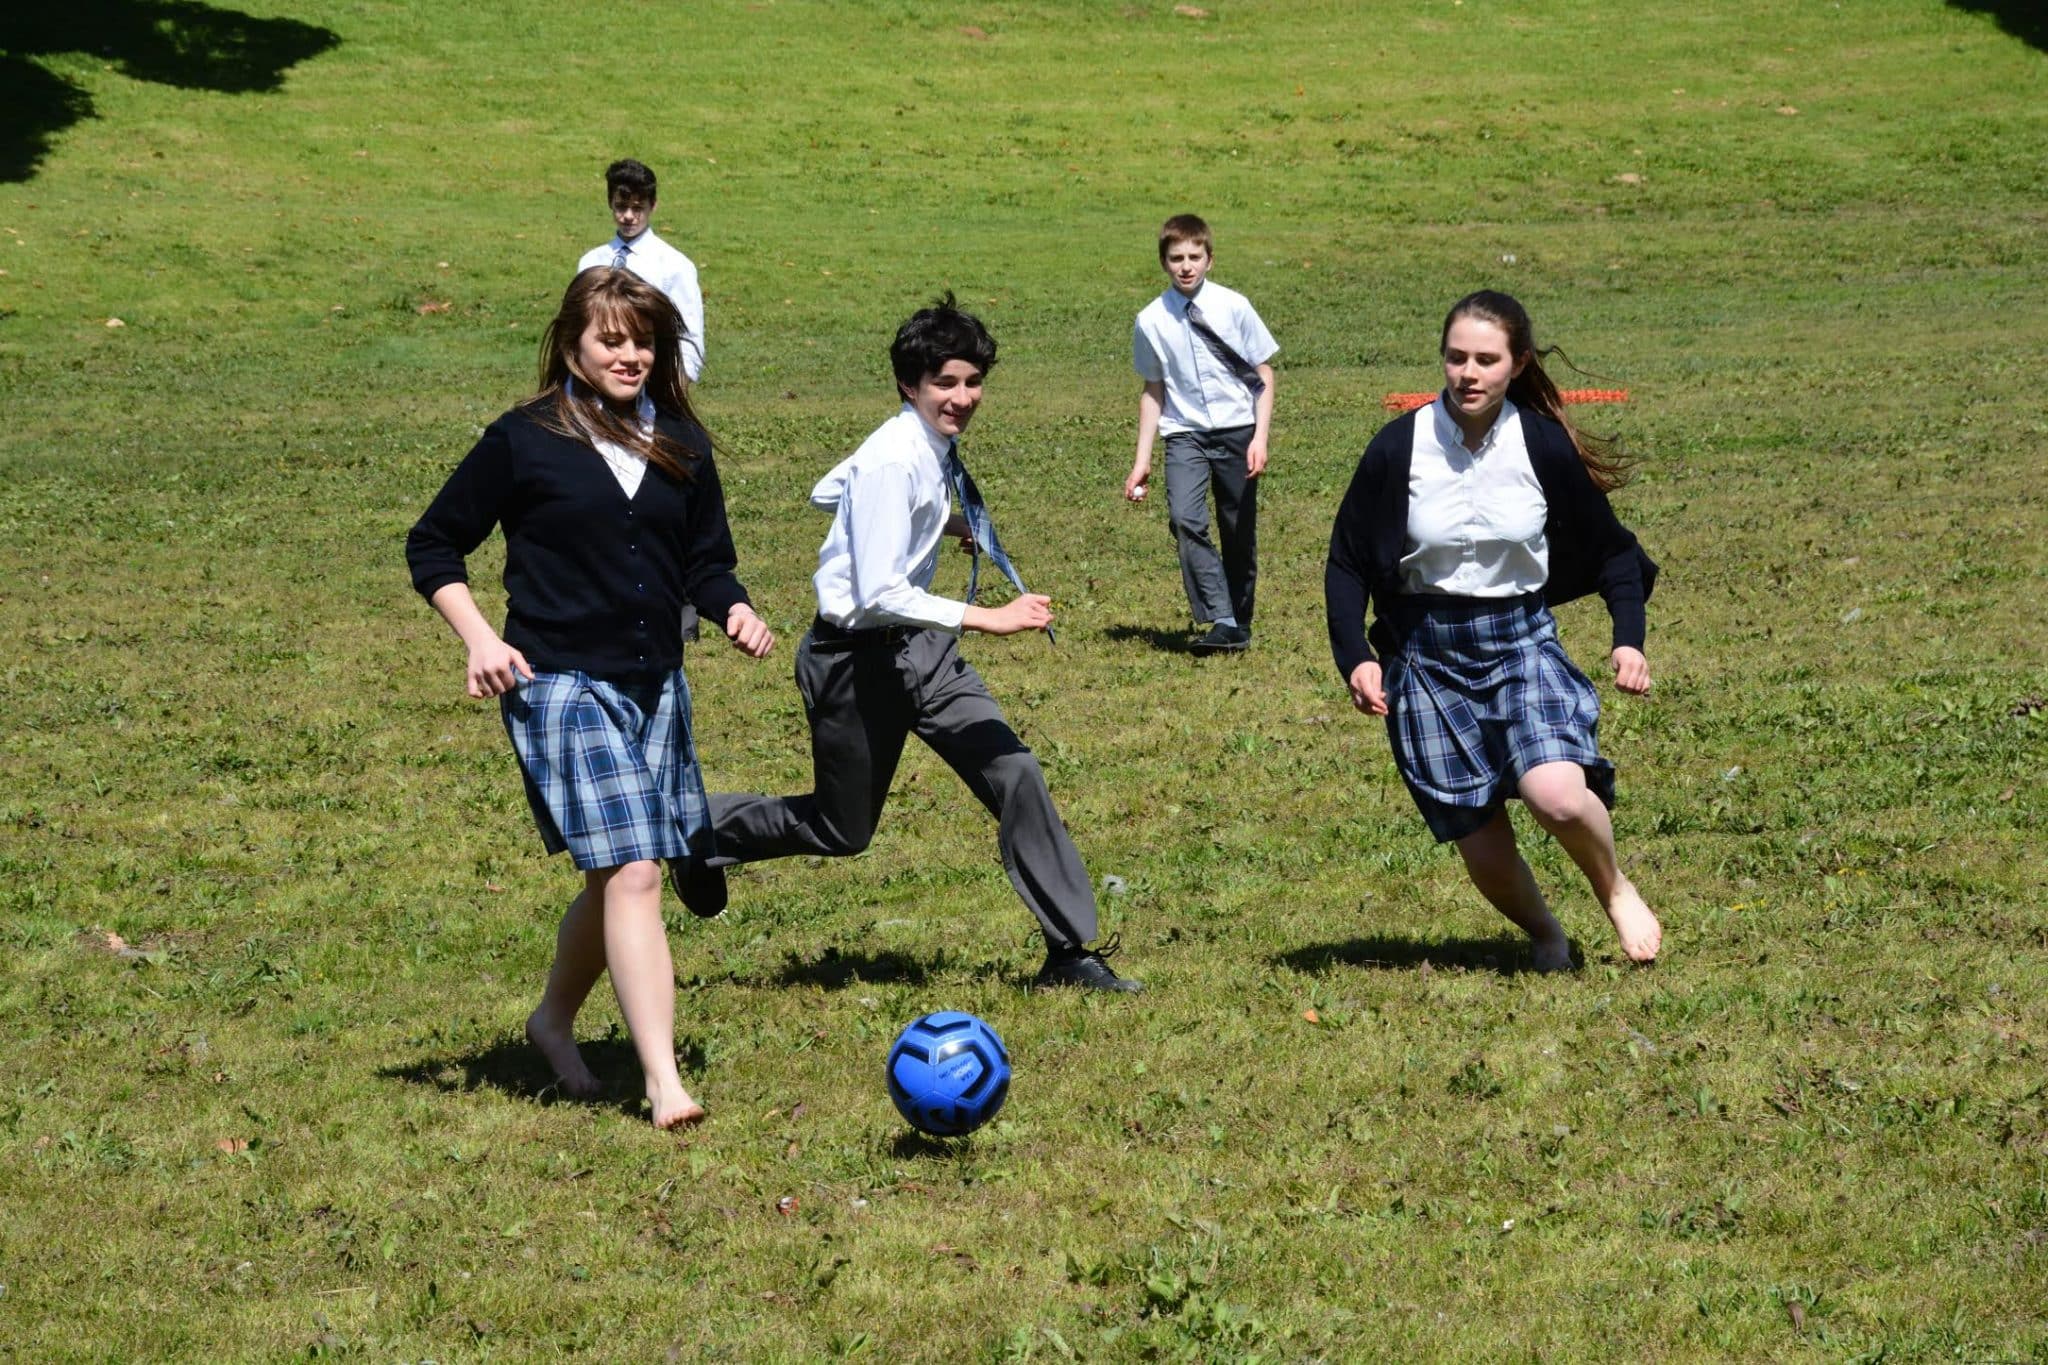 st. andrew's academy students playing soccer in green field